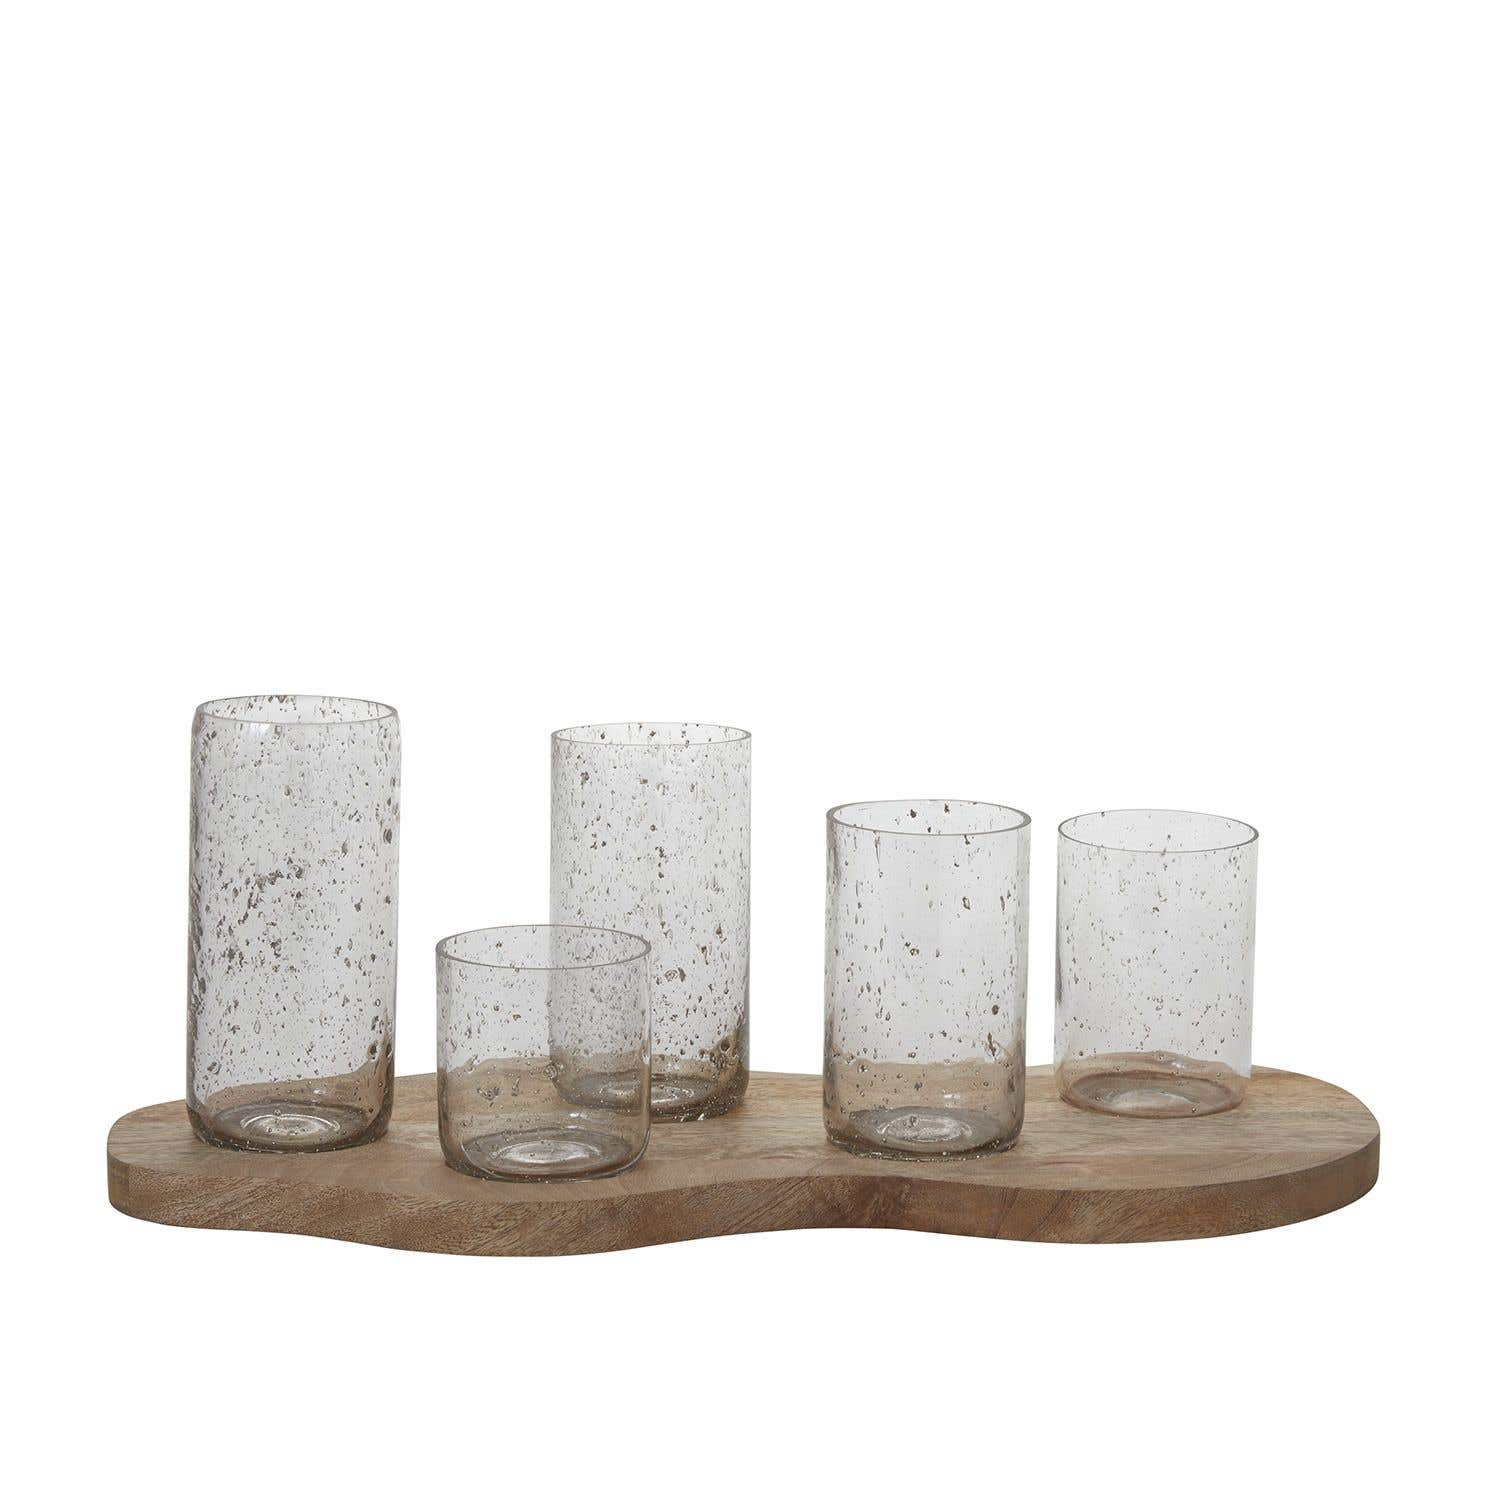 KYMA VASES WITH TRAY 23"x 10"x 8.5"